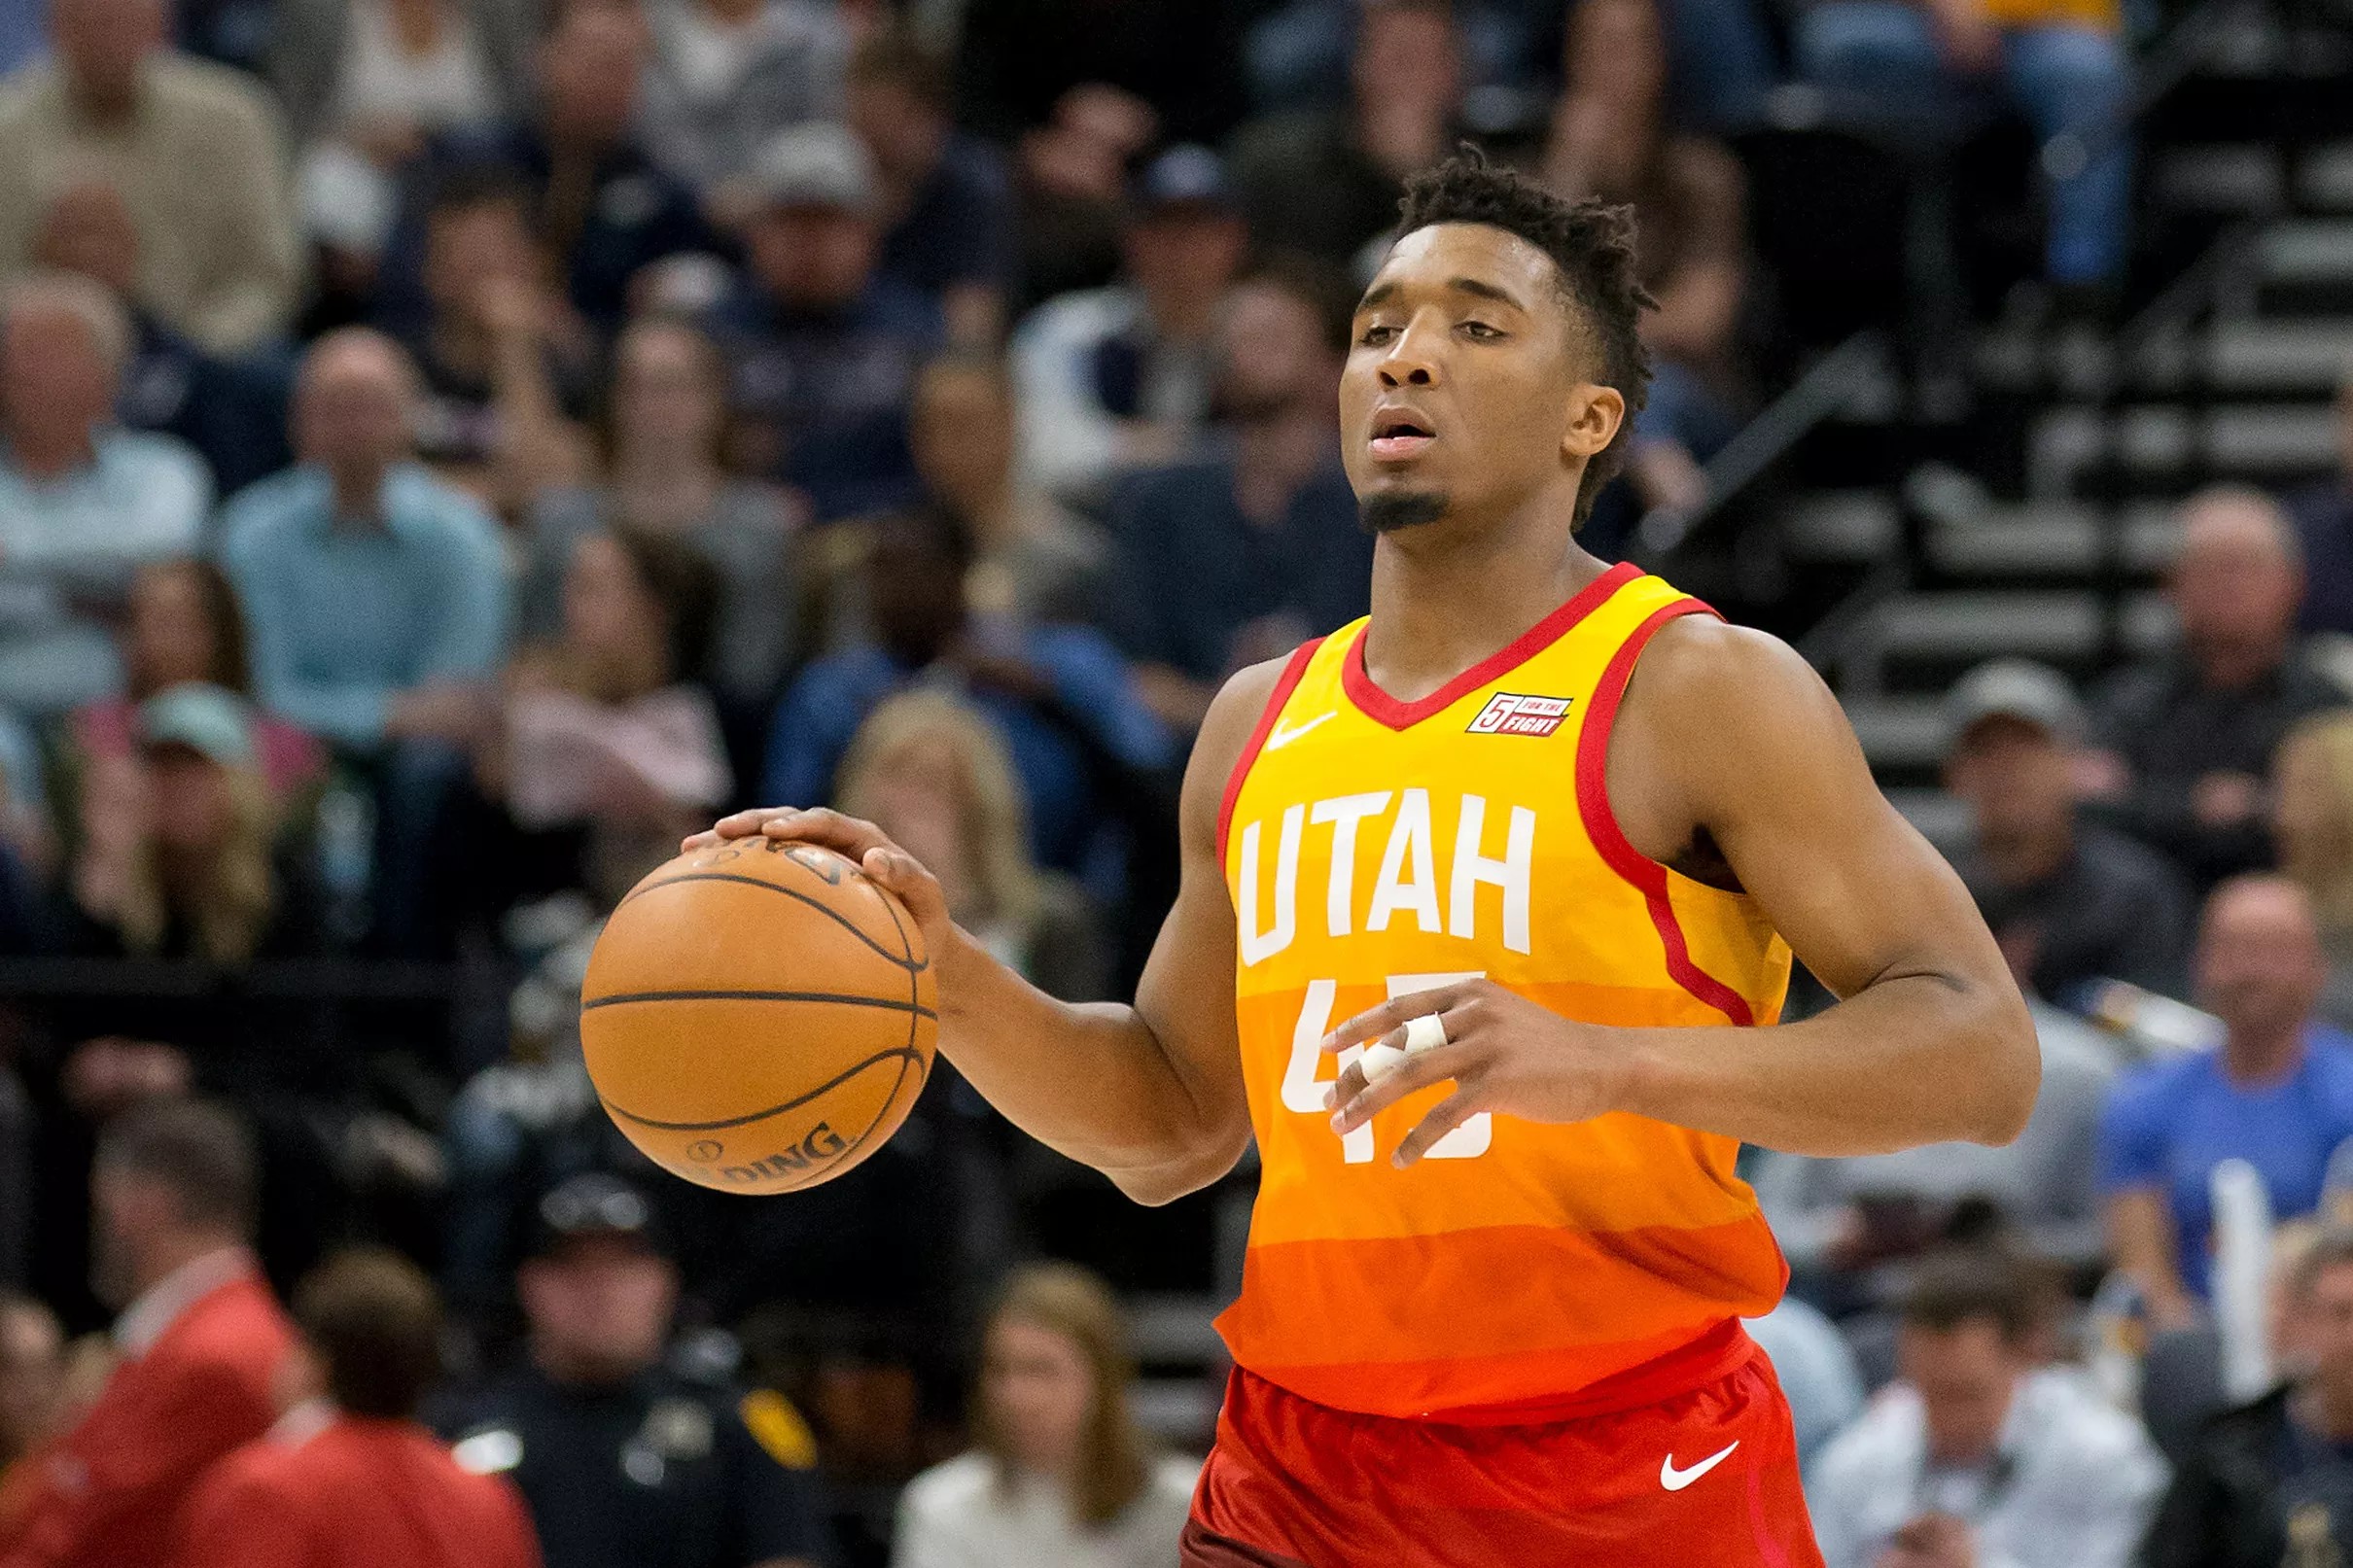 Donovan Mitchell is a special player whether he is Rookie of the Year